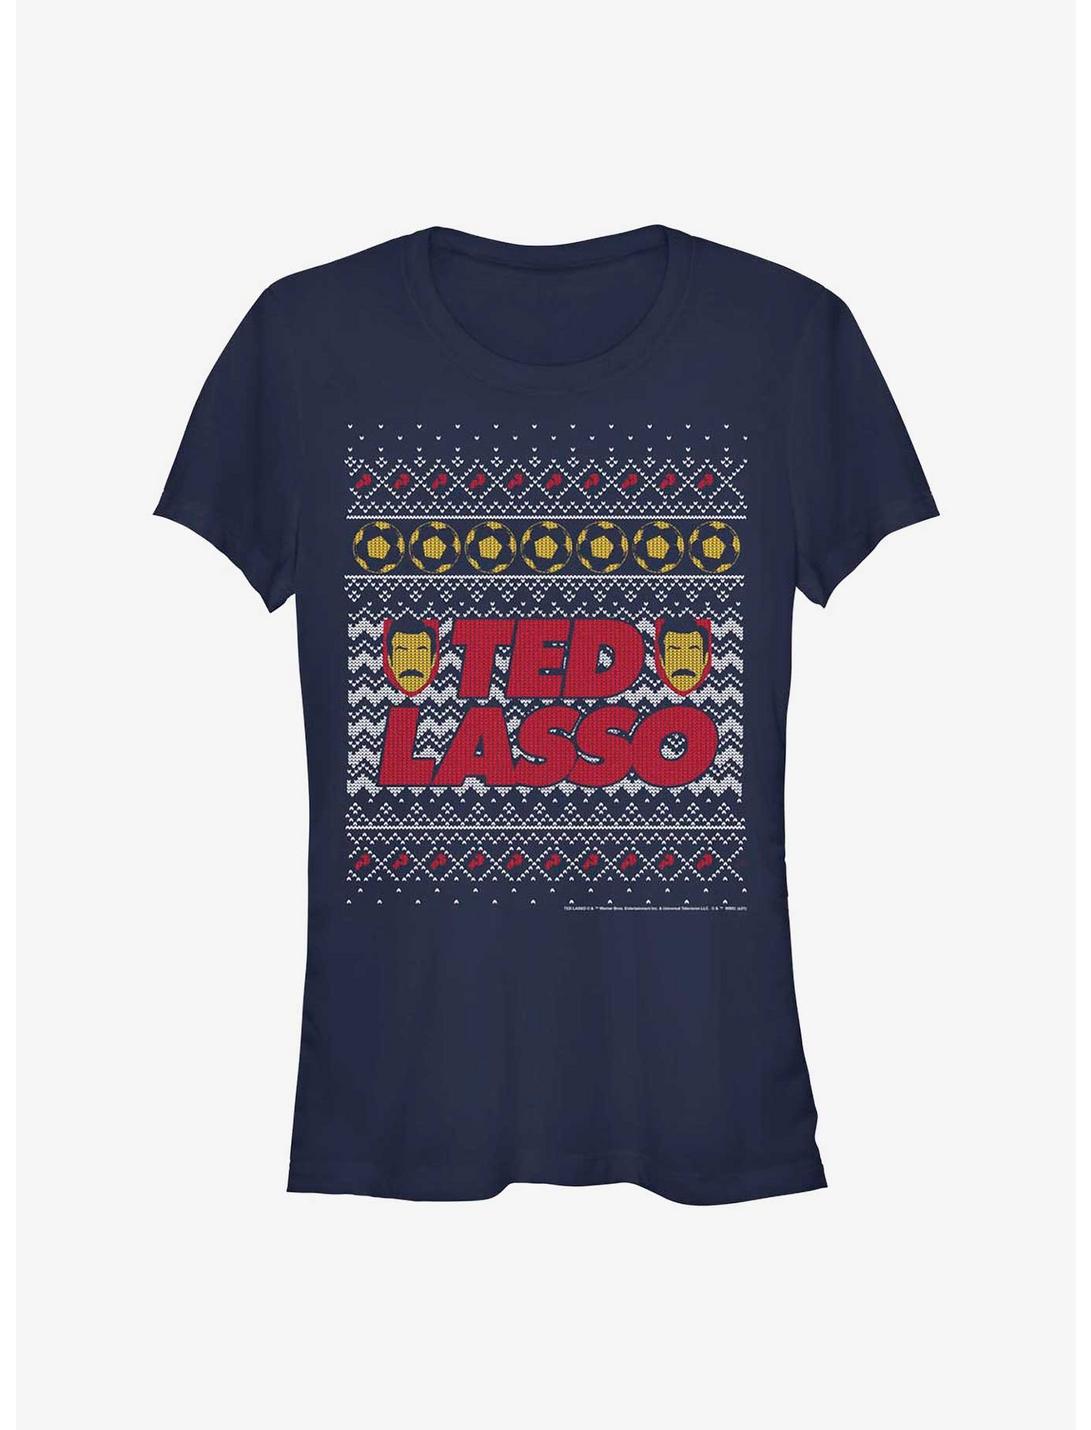 Ted Lasso Ugly Sweater Girls T-Shirt, NAVY, hi-res